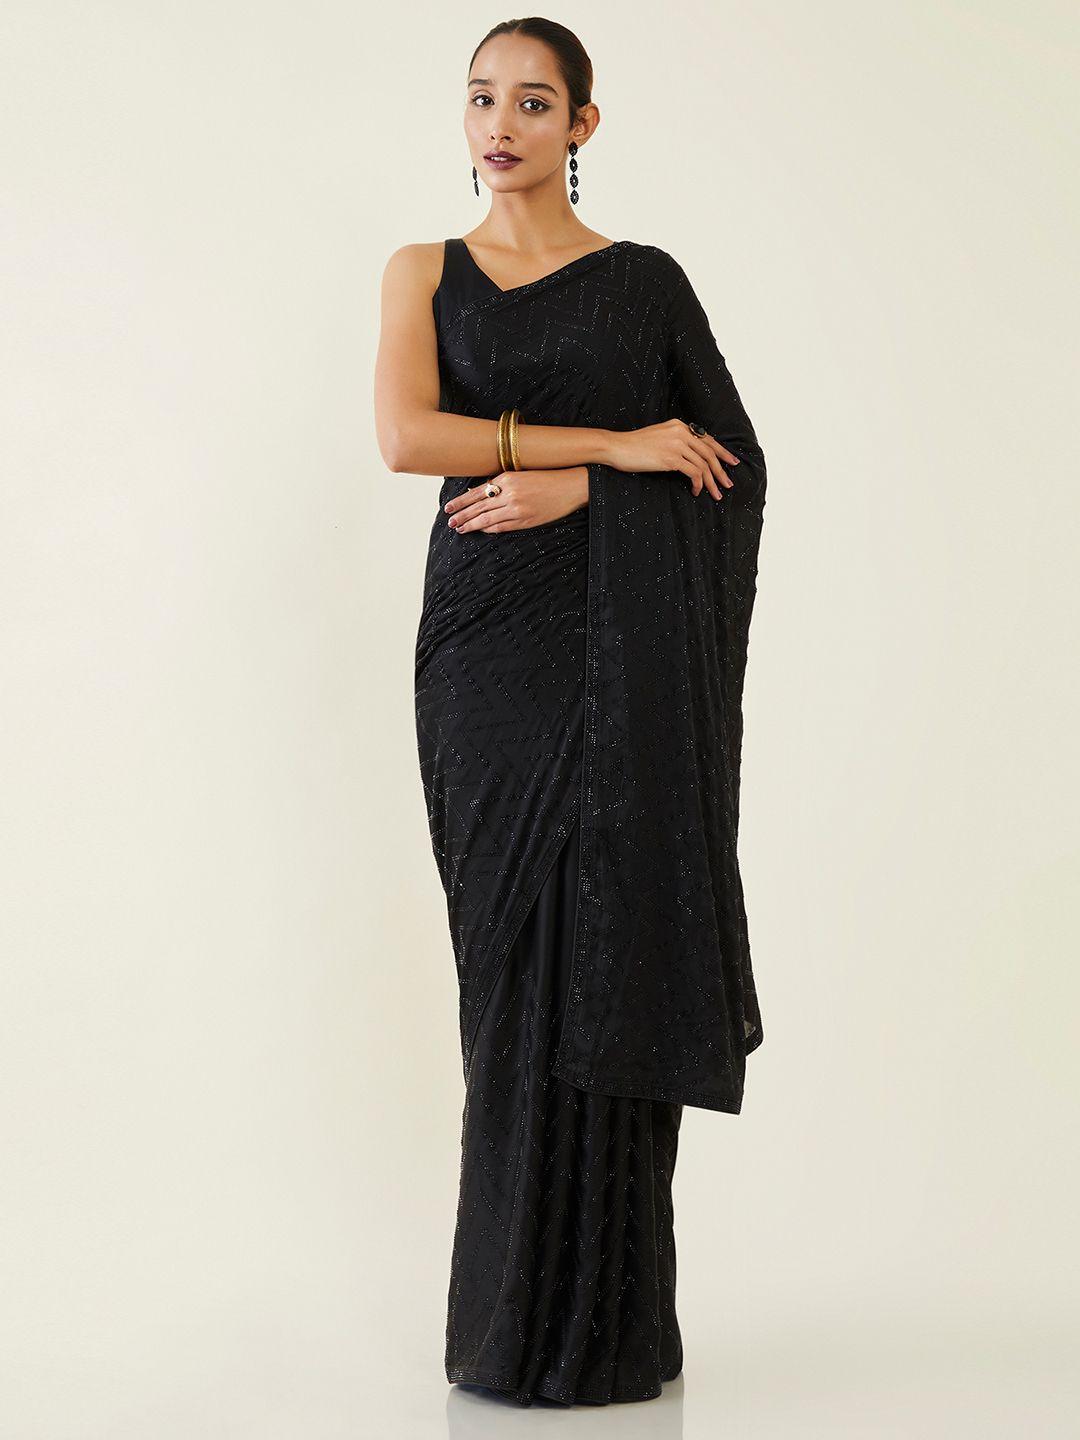 soch black embellished beads and stones saree